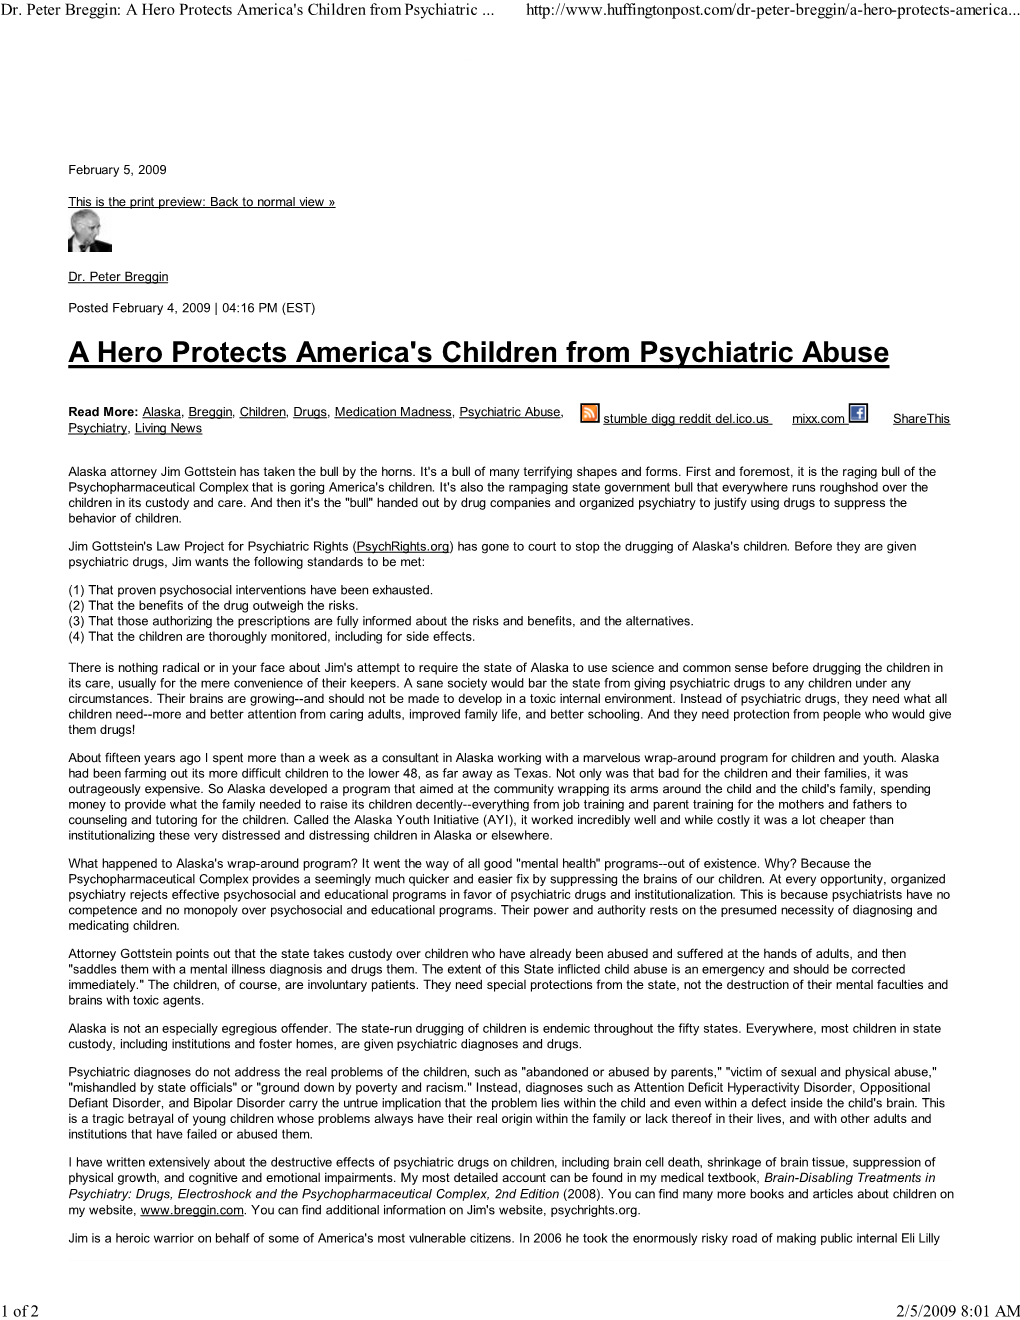 Dr. Peter Breggin: a Hero Protects America's Children from Psychiatric